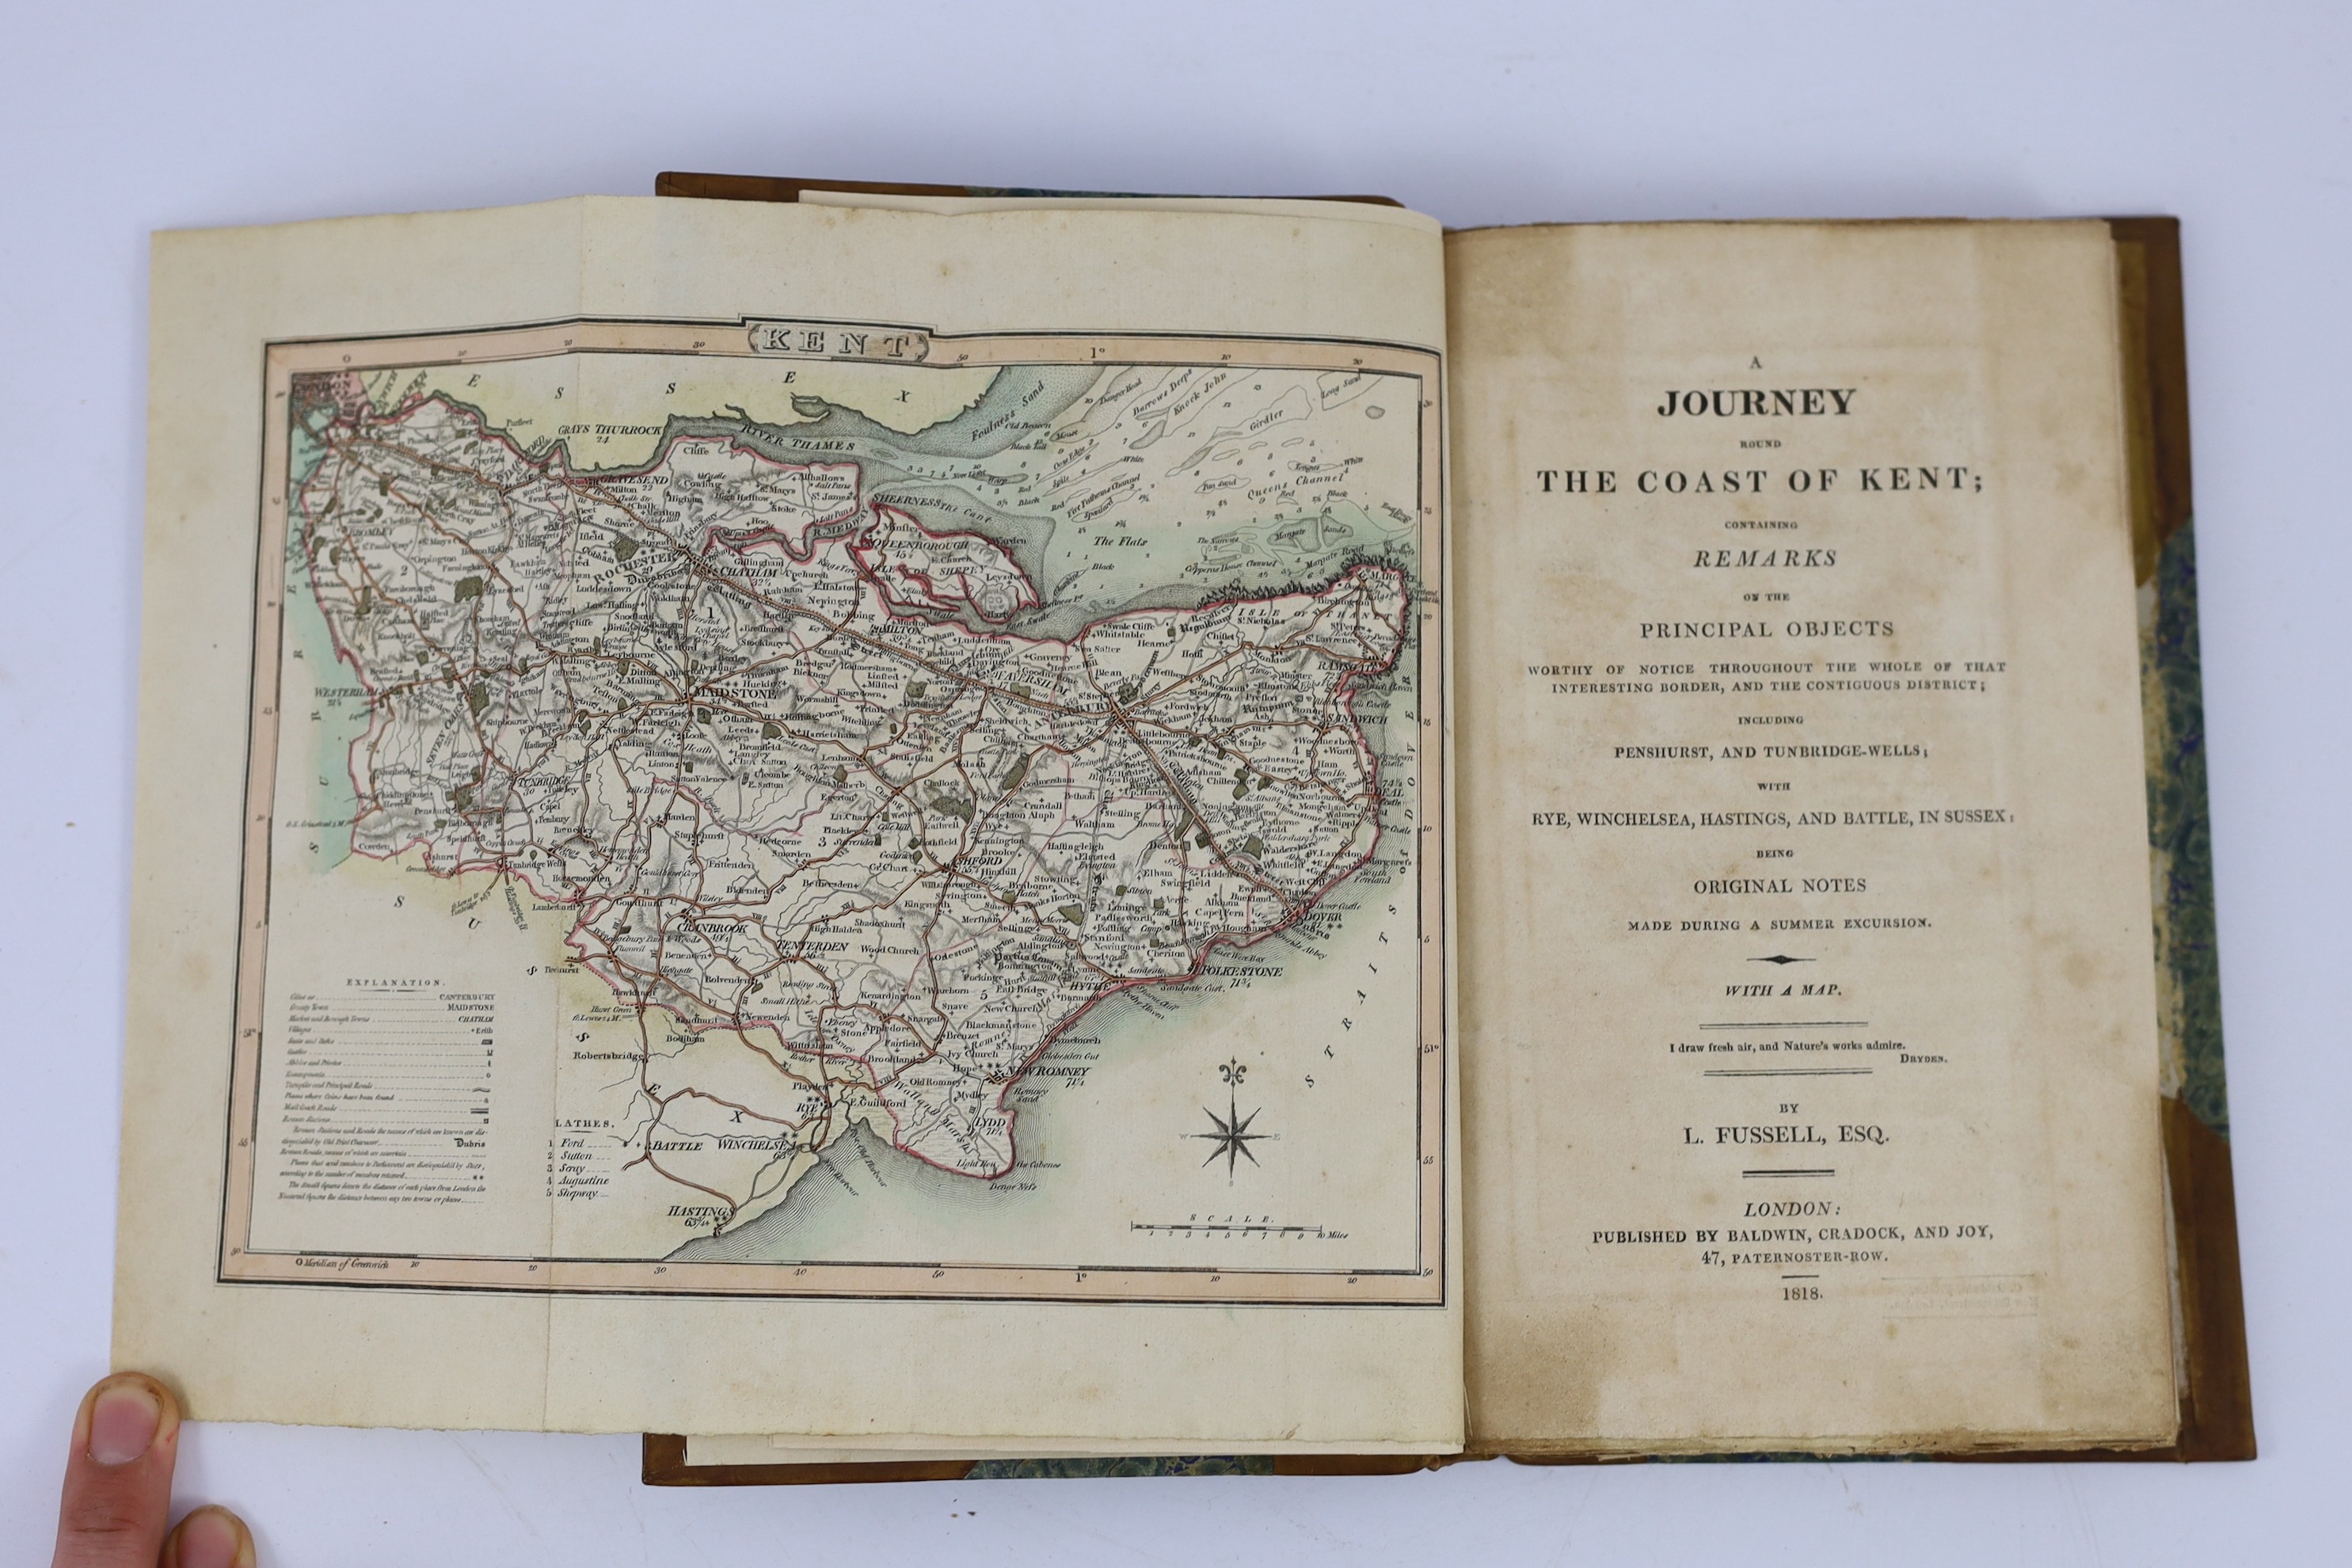 KENT: Fussell, L. - A Journey Round the Coast of Kent ... being Original Notes made during a Summer Excursion. coloured and folded map: rebound half calf and marbled boards, 1818